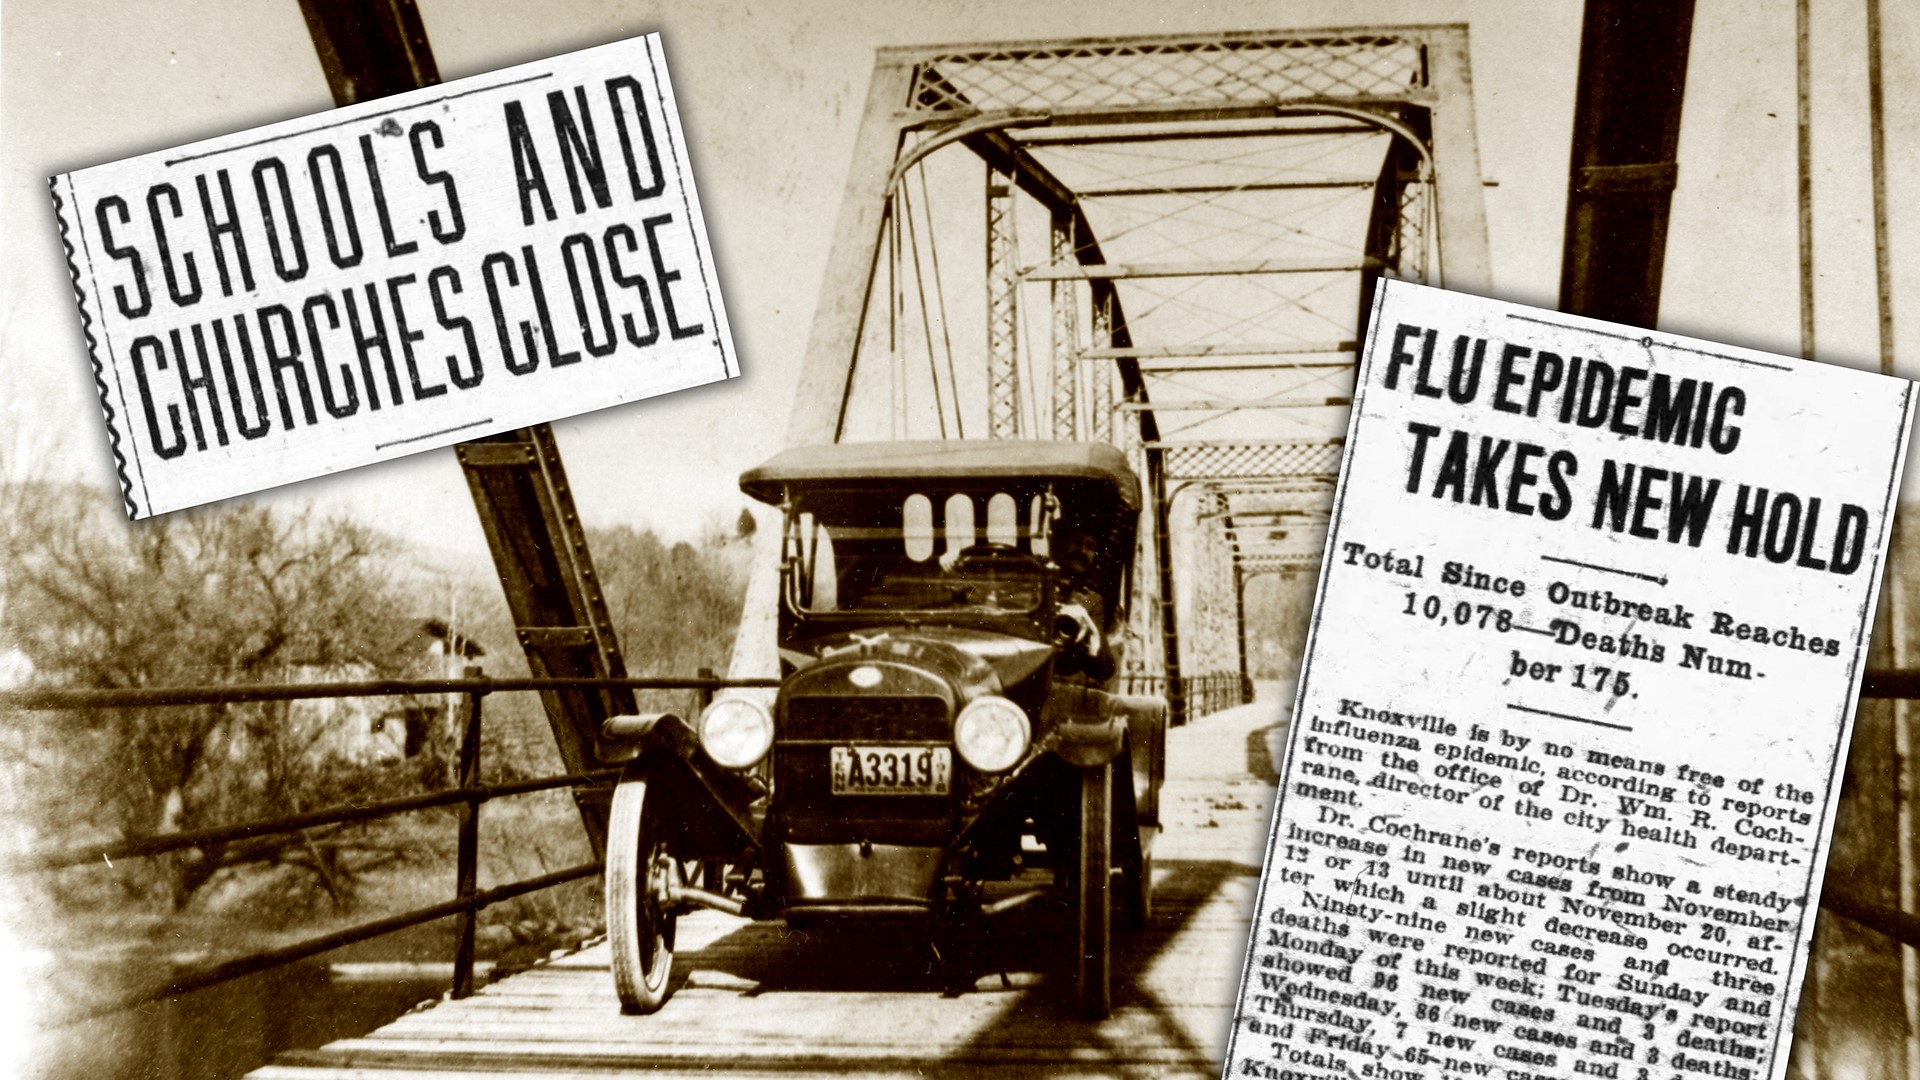 Experts have compared the coronavirus pandemic to the Spanish Flu in 1918. The similarities are striking when you look at the newspaper archives in East Tennessee.